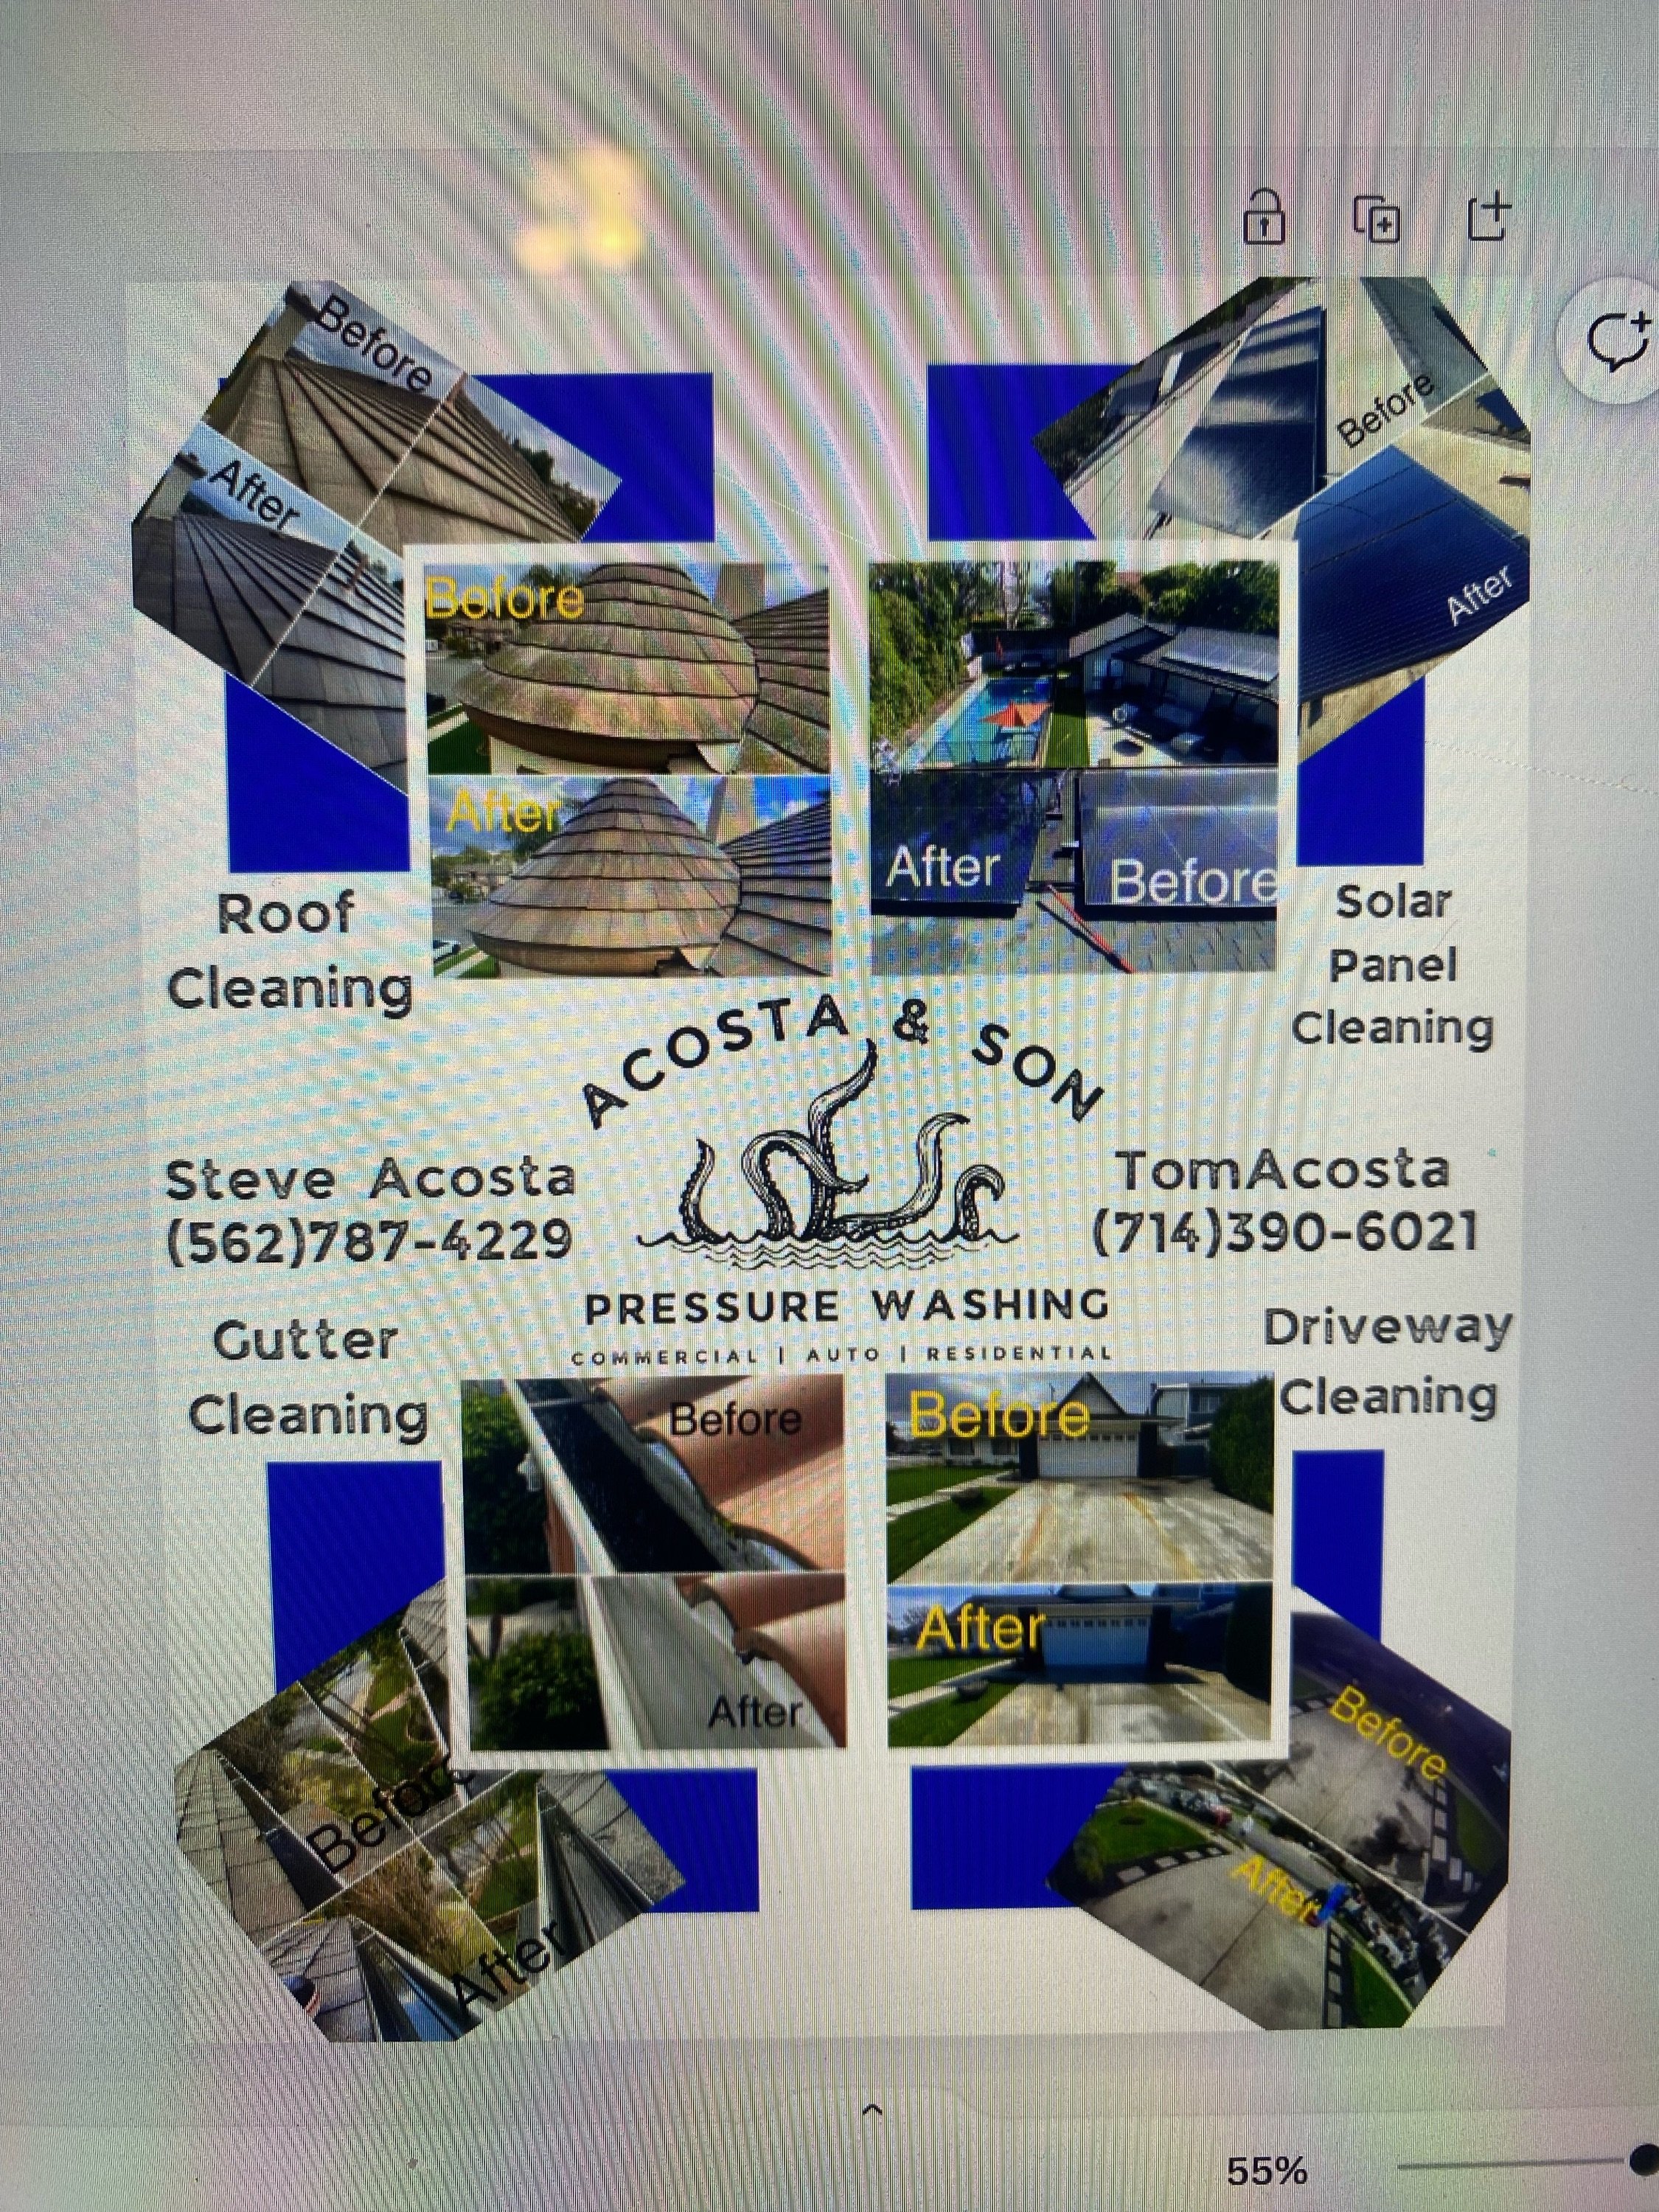 Acosta And Son Pressure Washing Services Logo